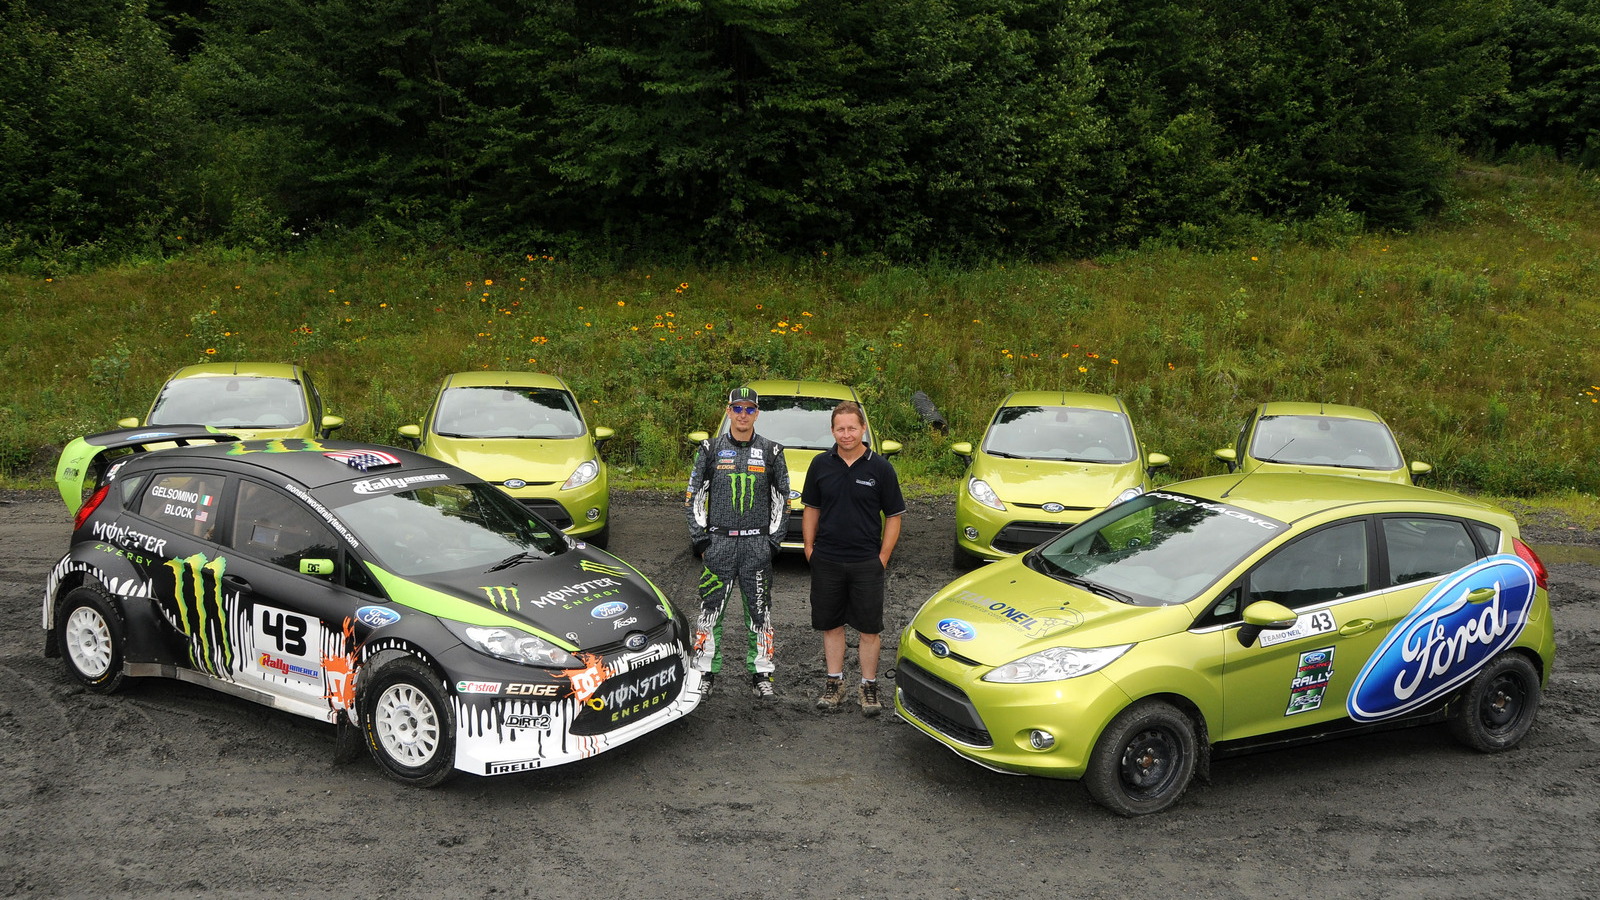 Team O'Neil and Ford Racing team up for the Fiesta Rally Experience